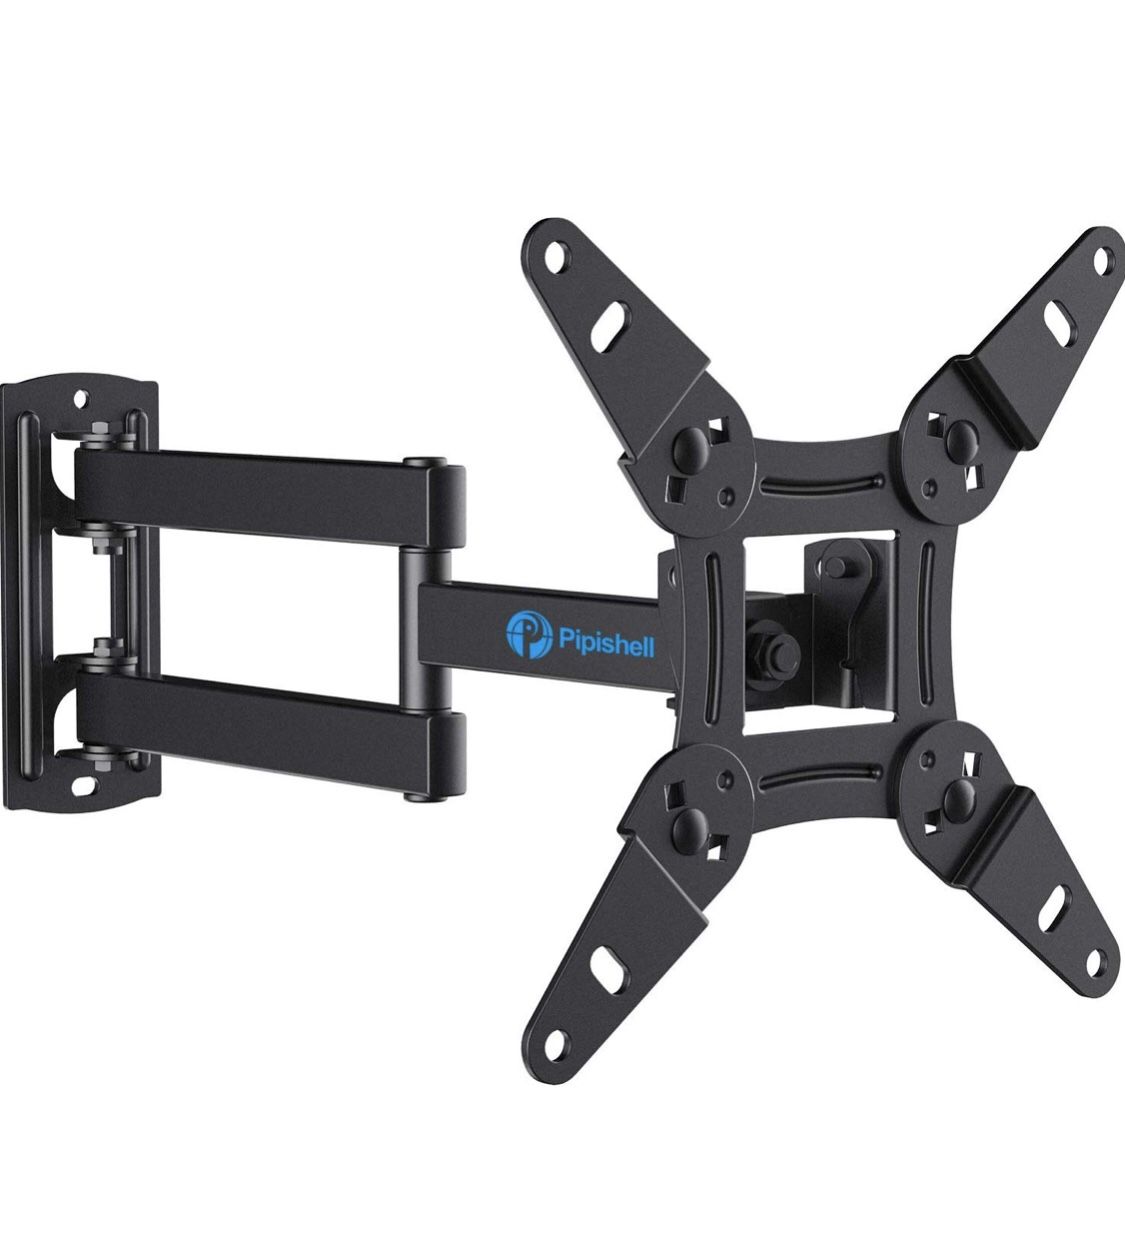 Full Motion TV Monitor Wall Mount Bracket Articulating Arms Swivels Tilts Extension Rotation for Most 13-42 Inch LED LCD Flat Curved Screen TVs & Mon